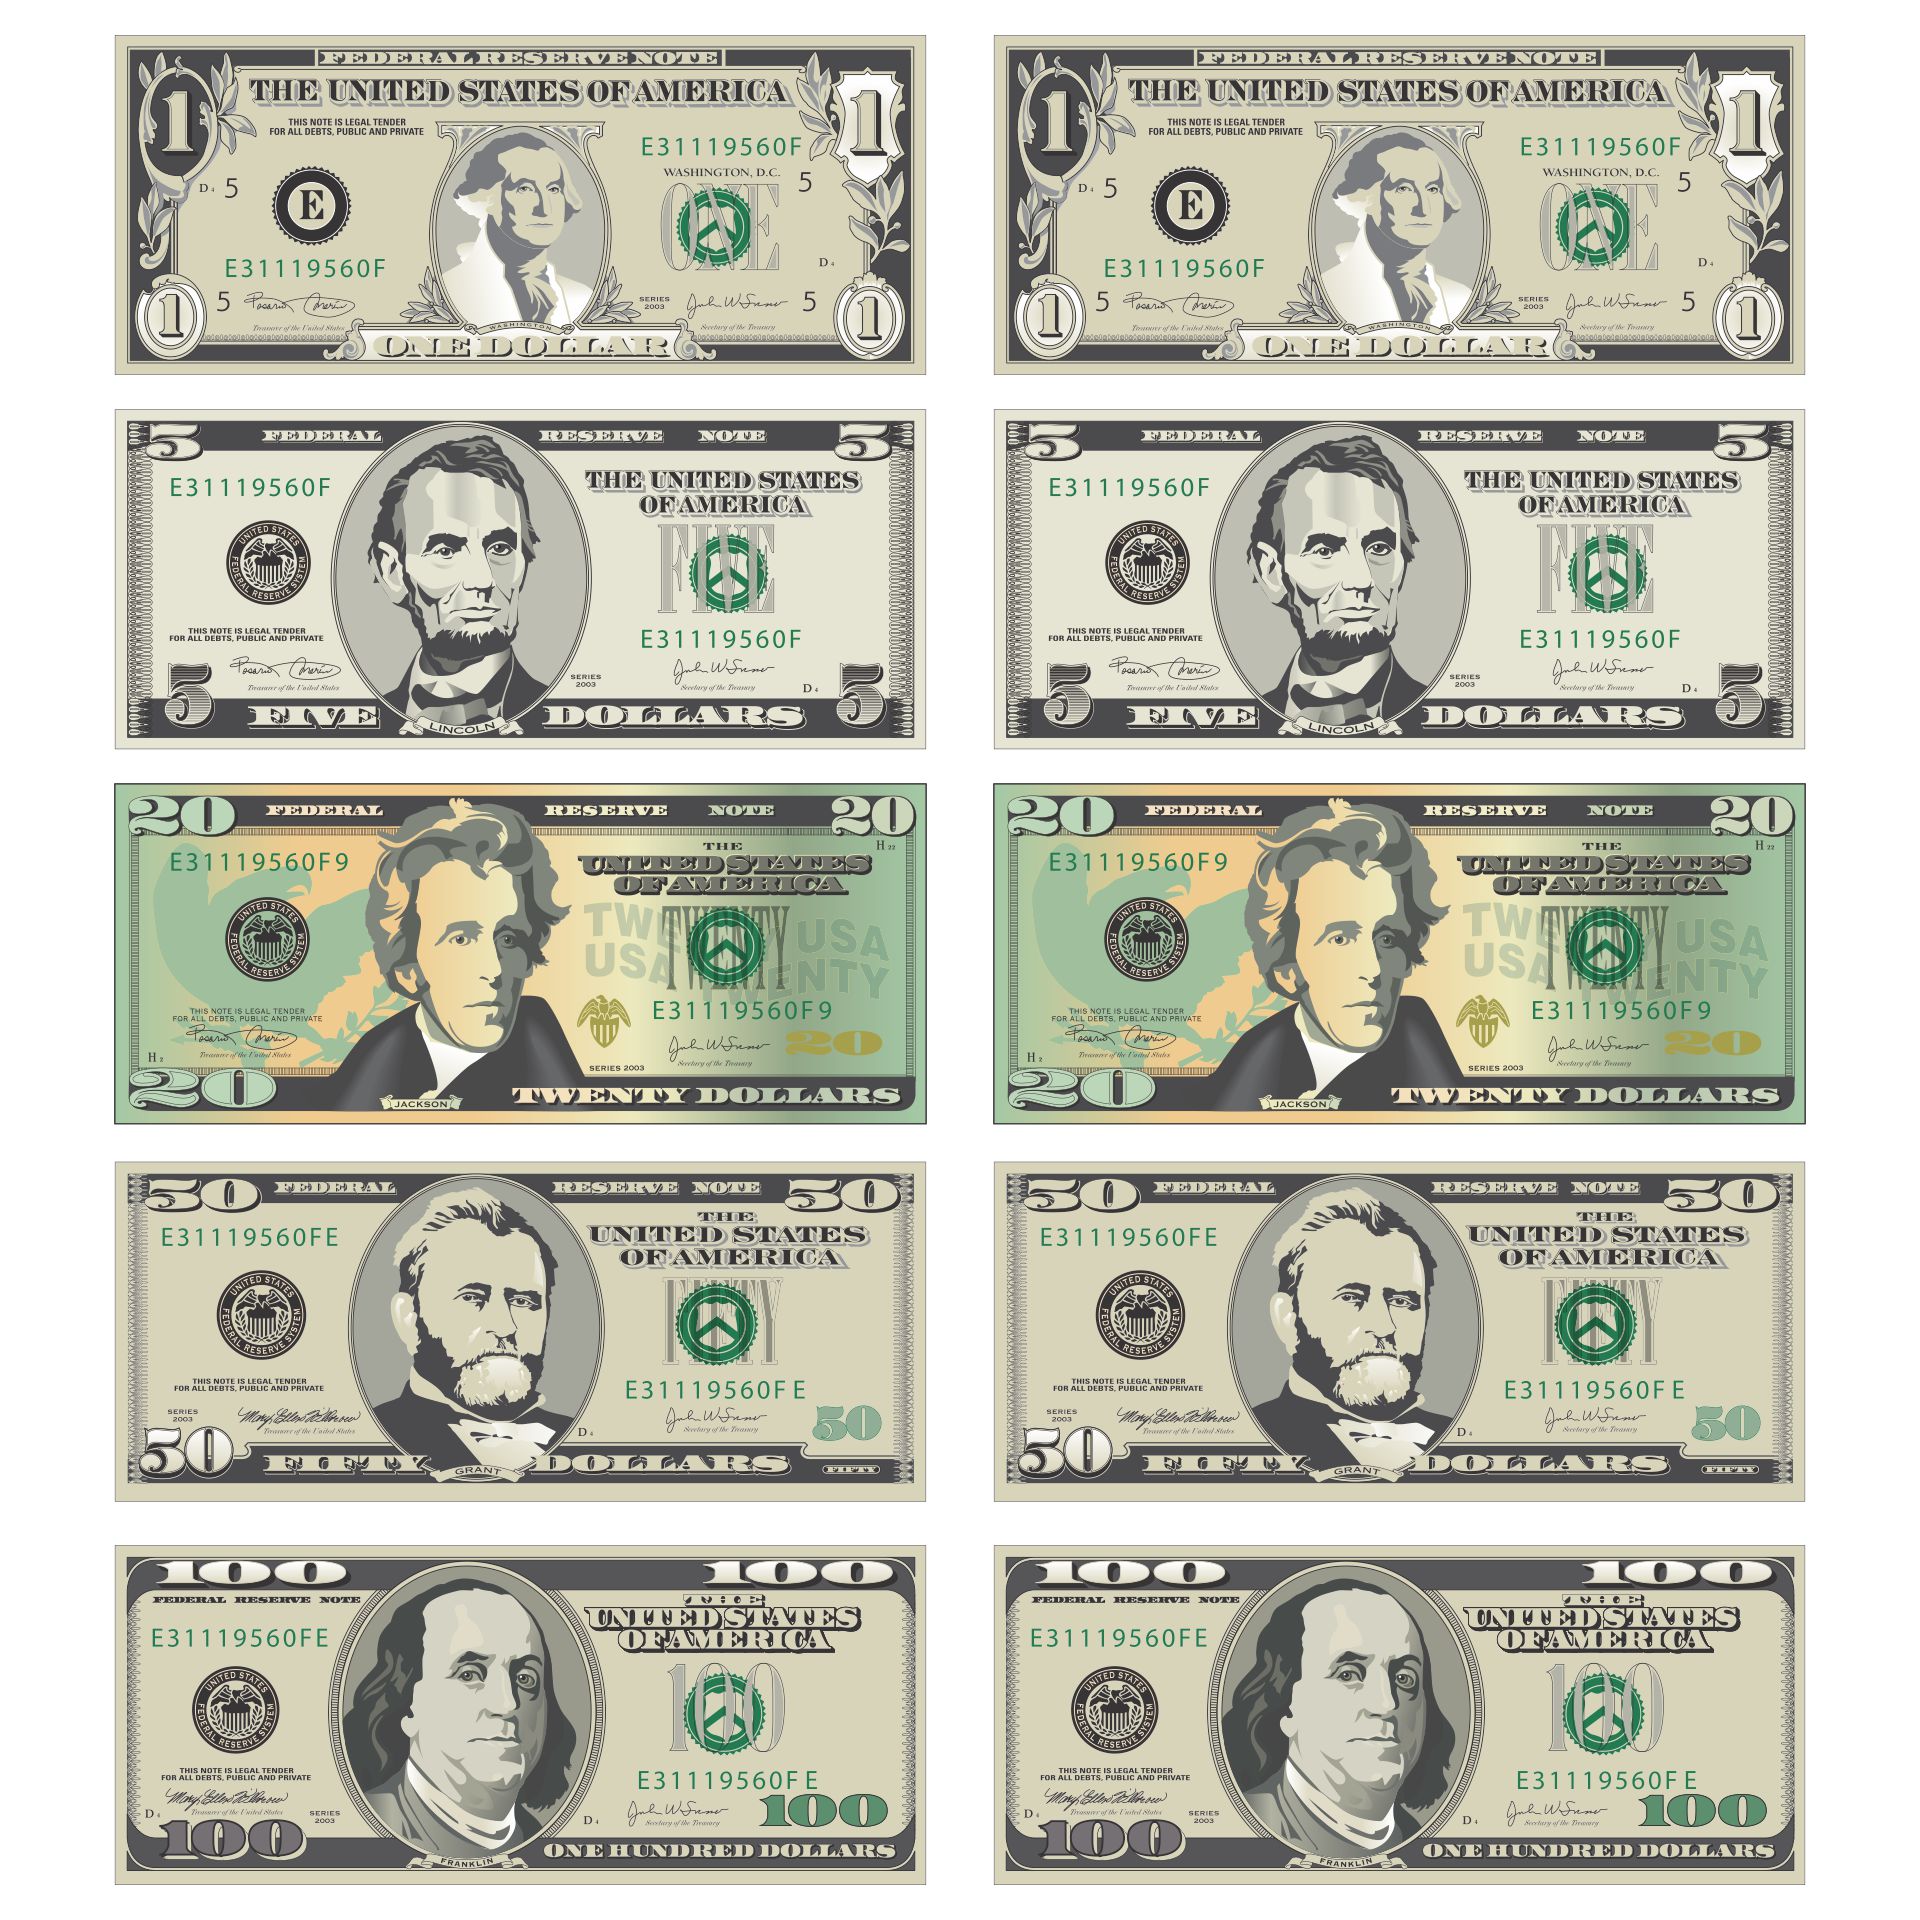 Get Print Fake Money Template PNG Infortant Document